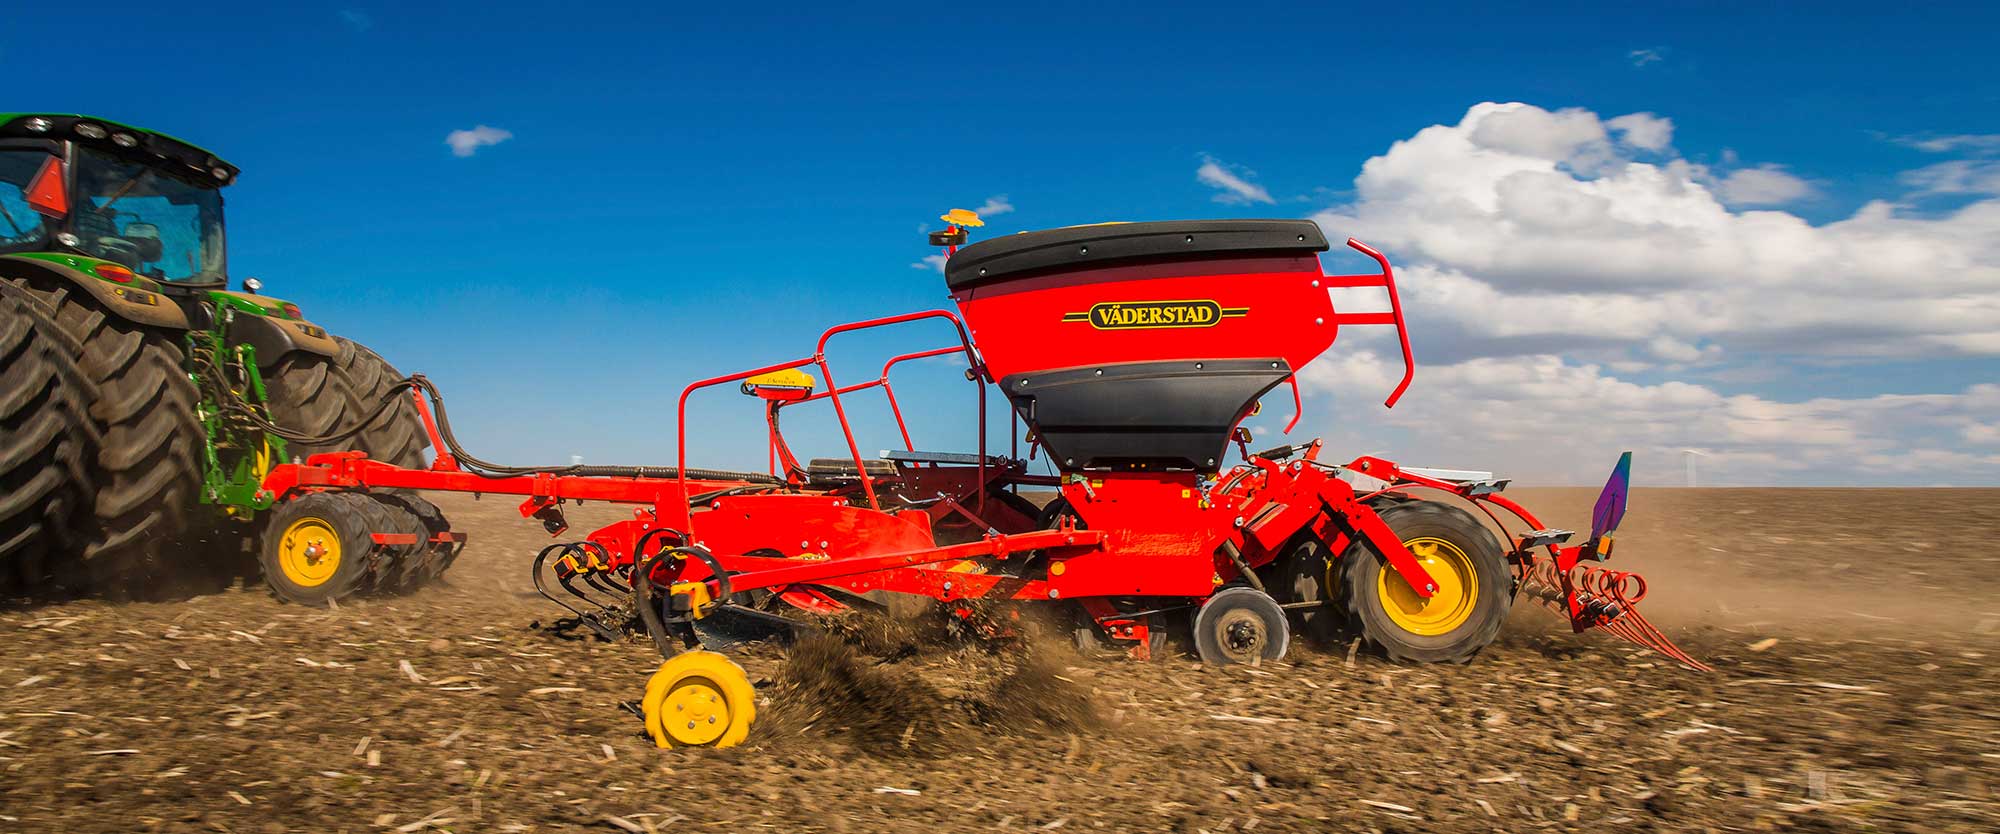 Rapid 300-400 cs - a box seed drill for optimal seed placement